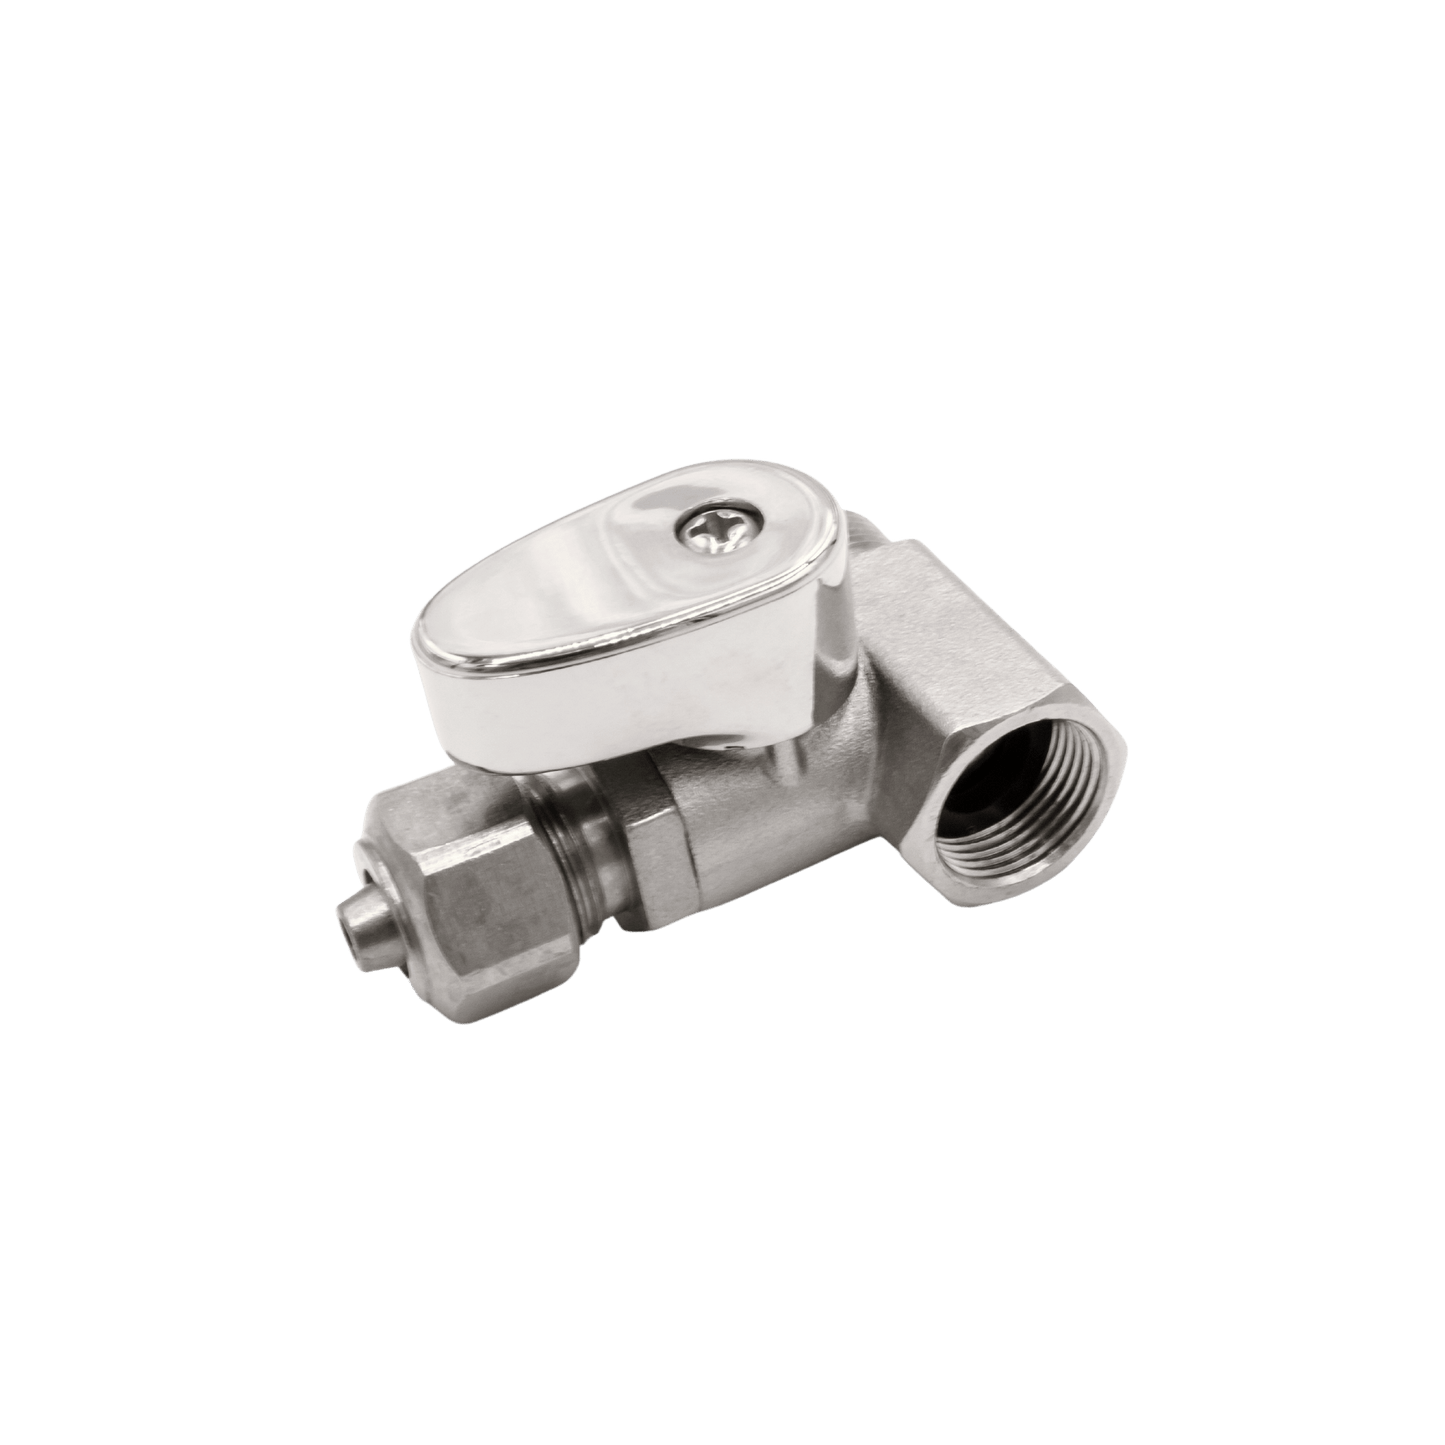 Hot Water Teardrop Nickel Shut-Off T-Adapter for NEO series, angled view